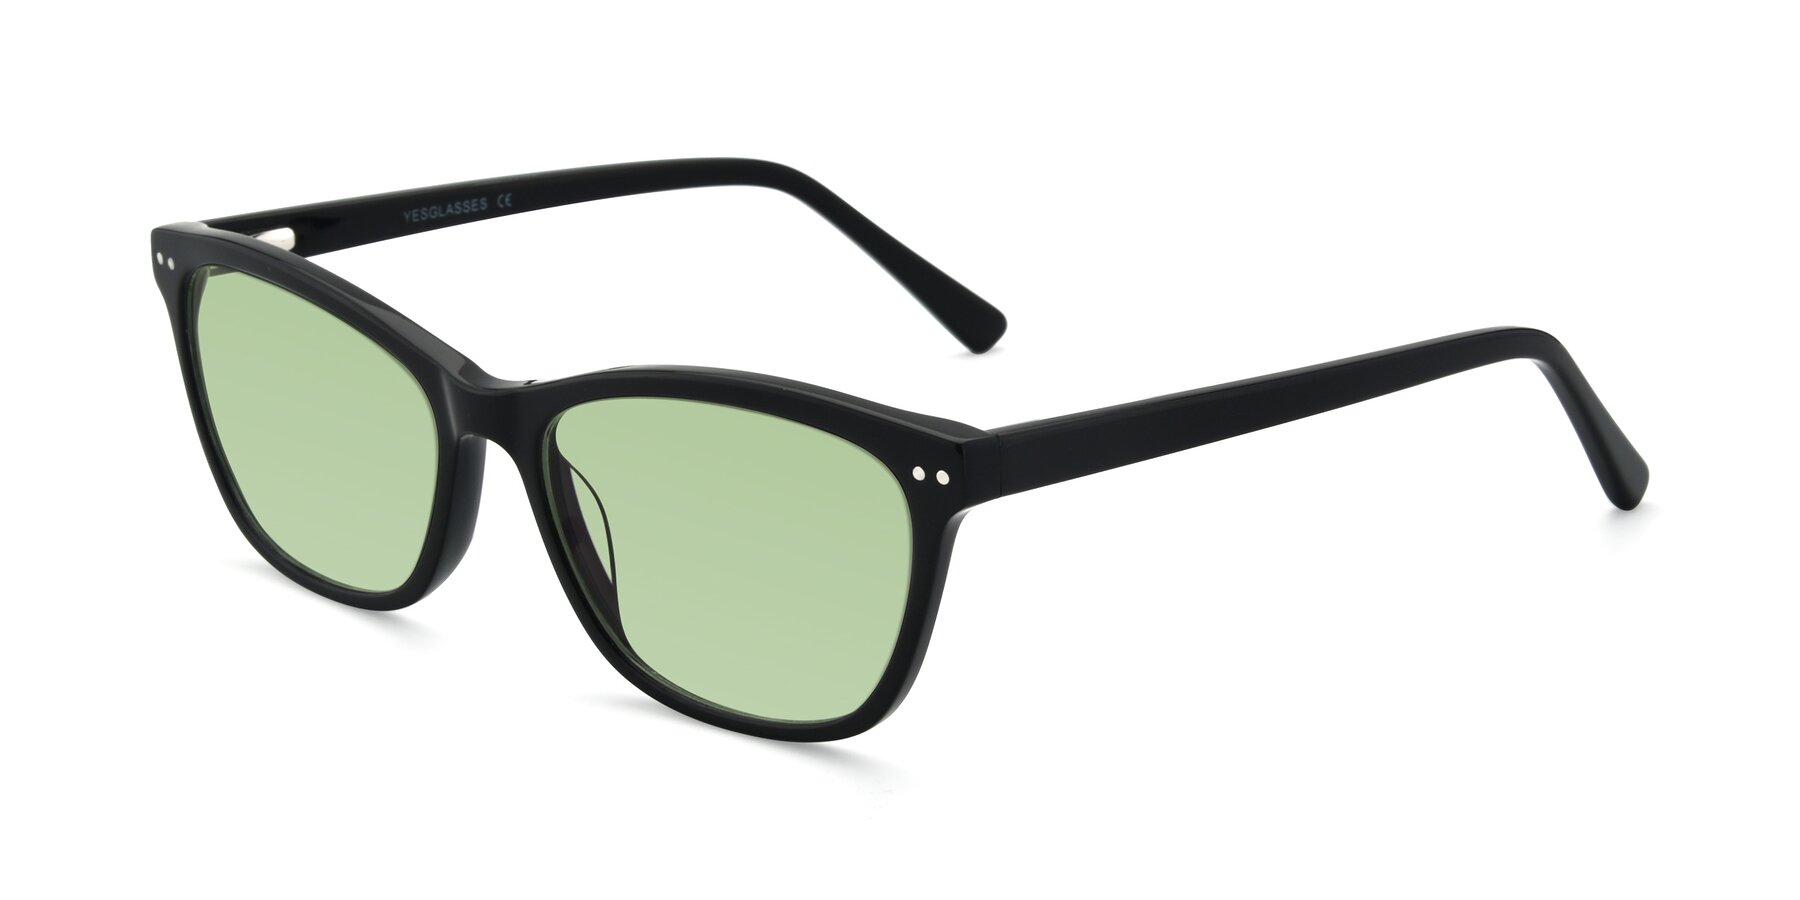 Angle of 17350 in Black with Medium Green Tinted Lenses